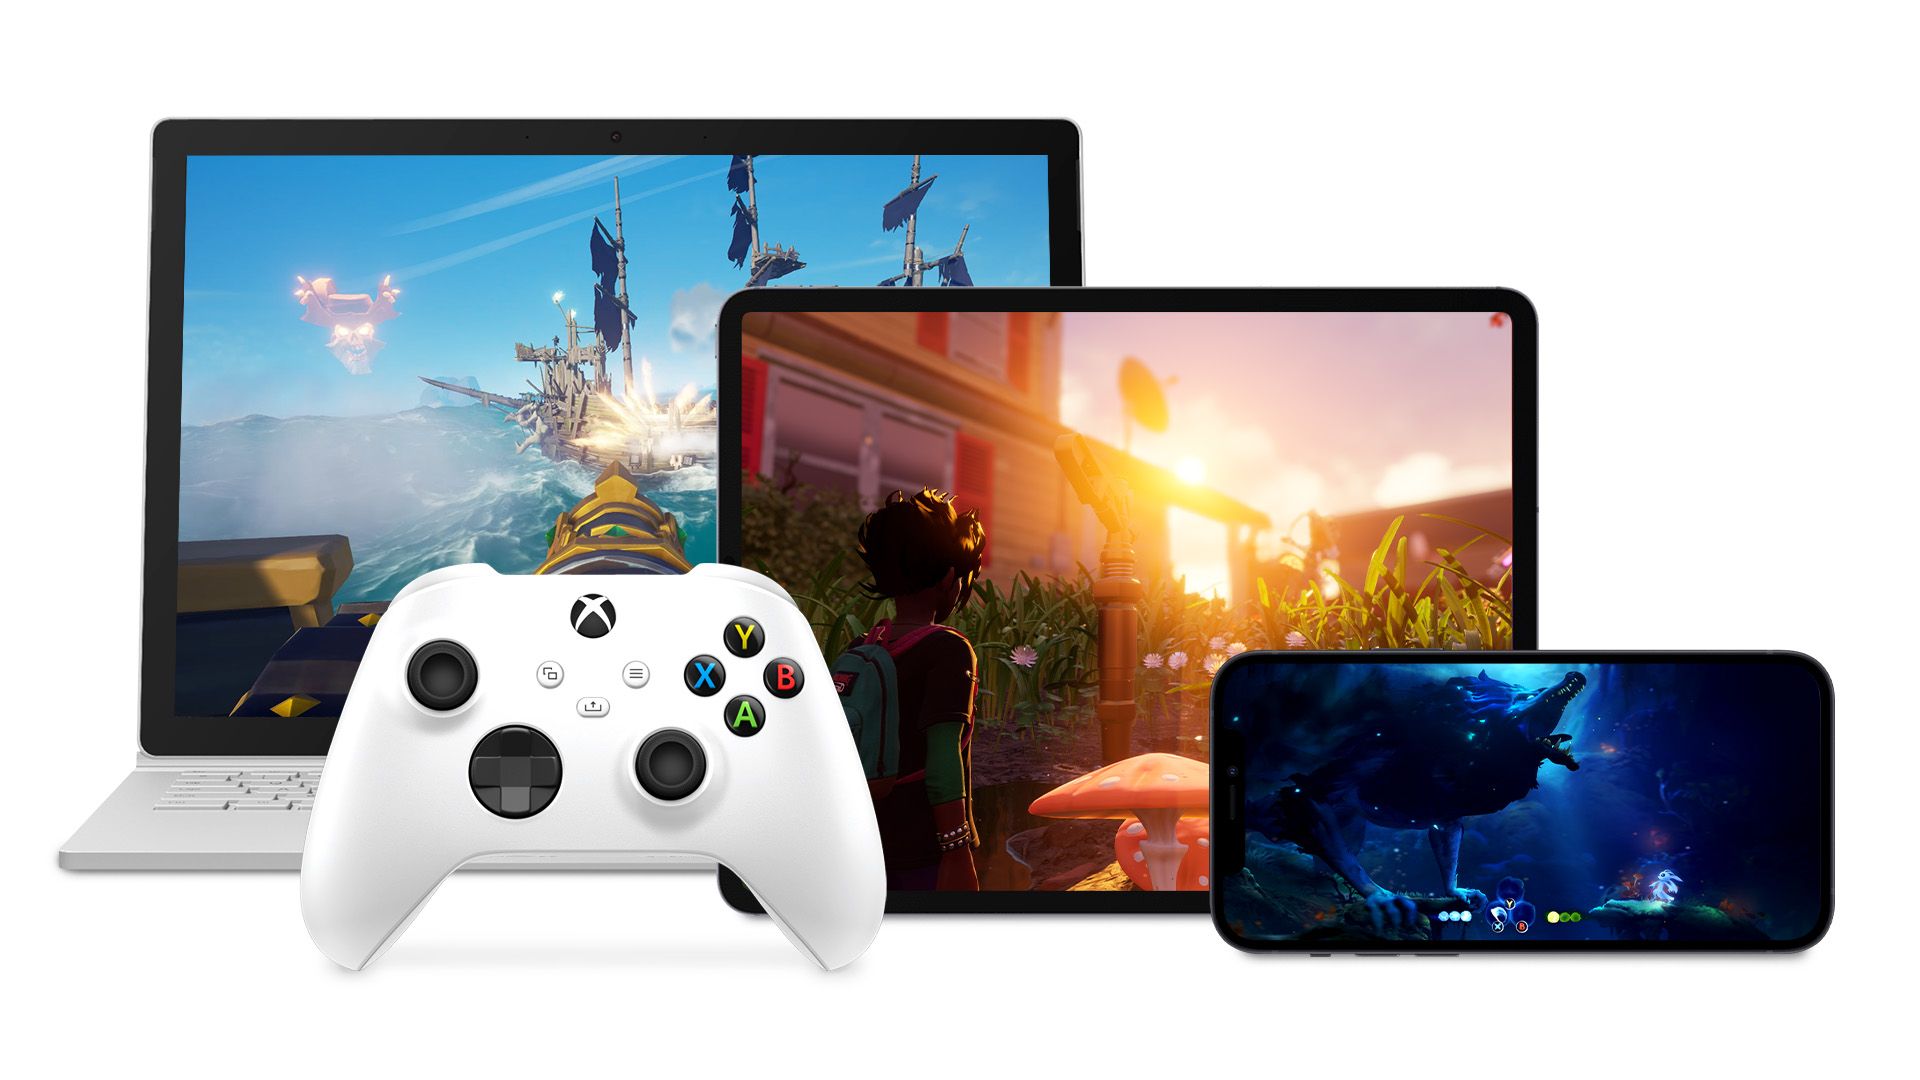 Image of Xbox controller in front of tablets and computers running Xbox games